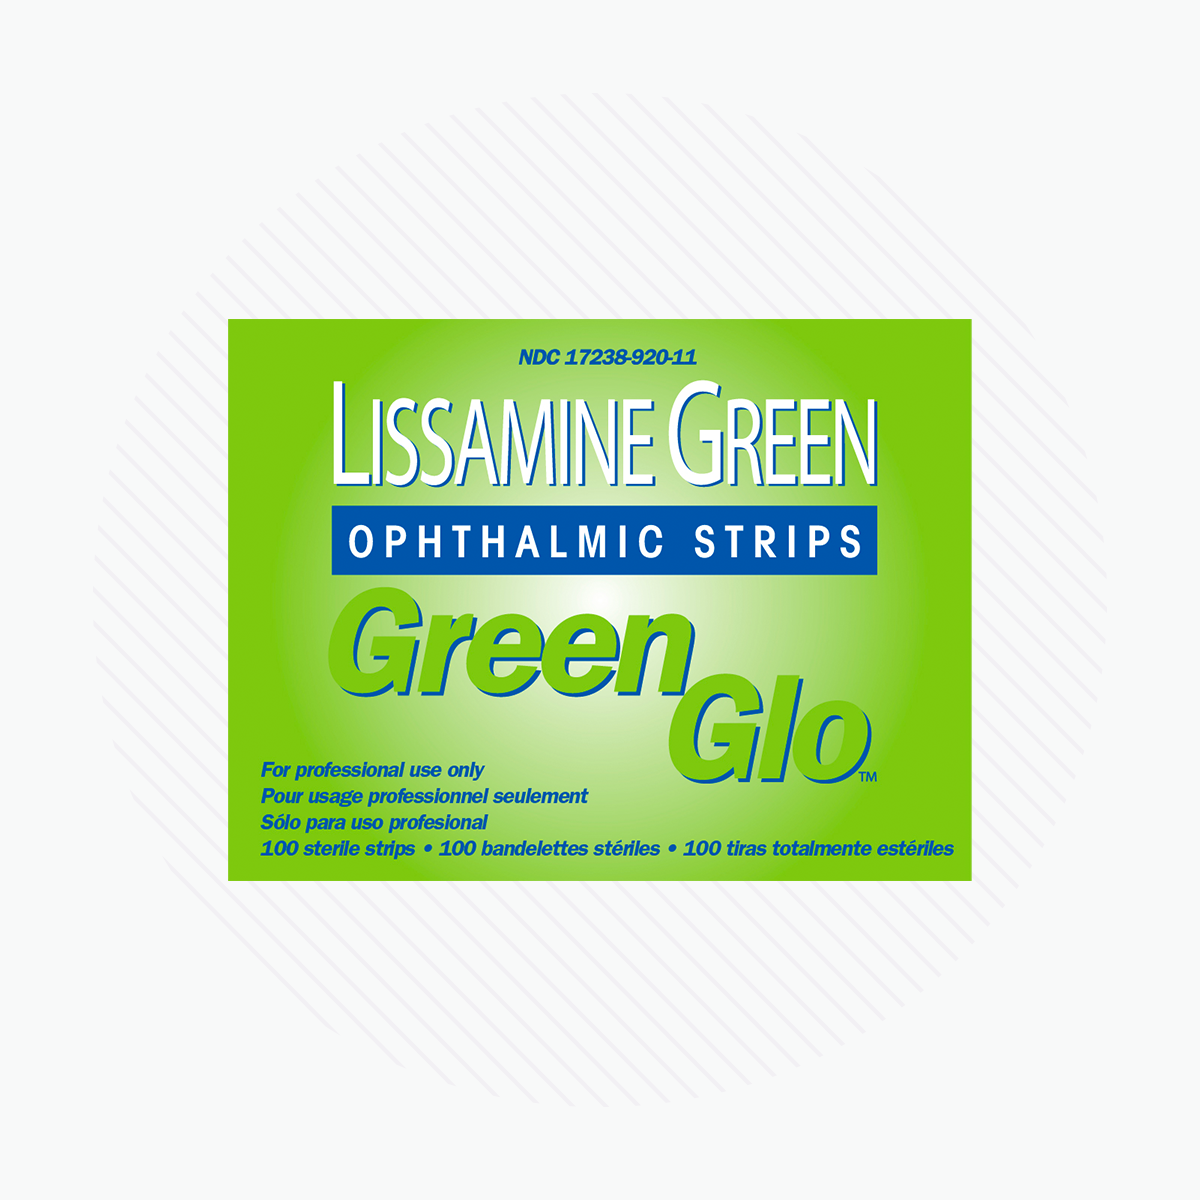 Green Glo Lissamine Green Ophthalmic Strips